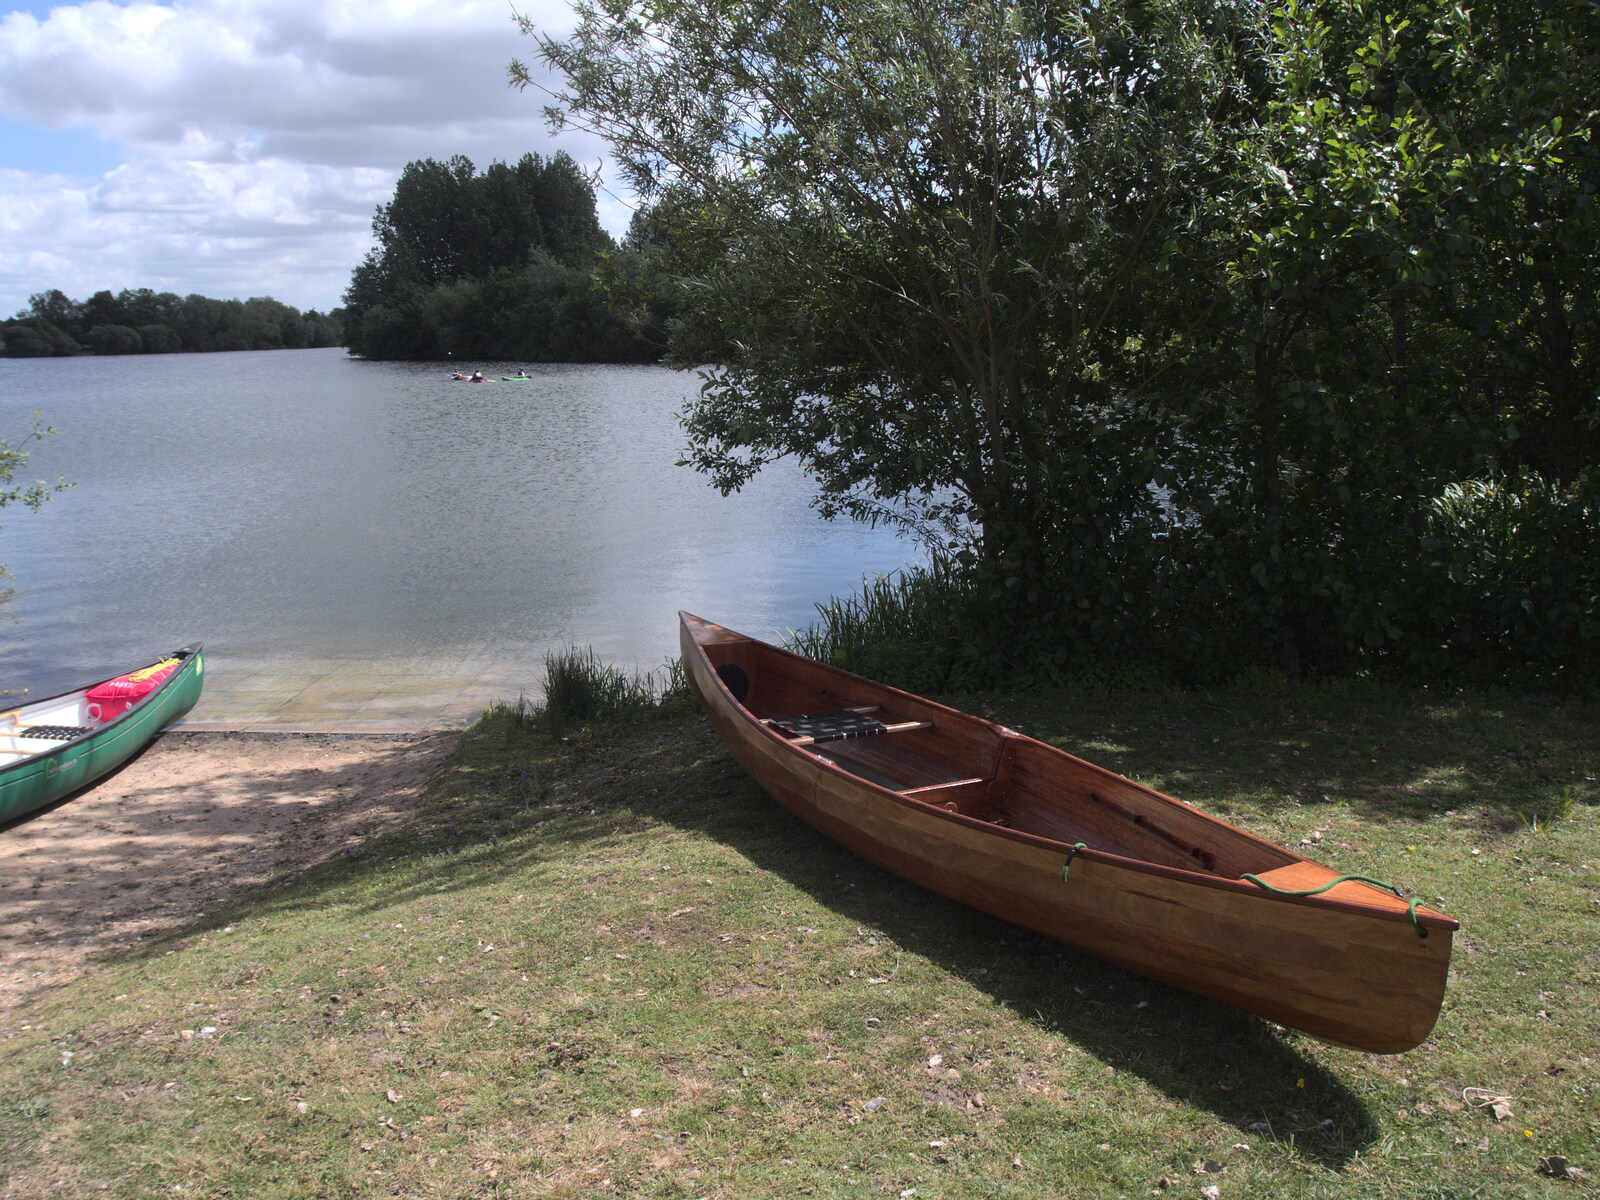 A Day at the Lake, Weybread Pits, Harleston, Norfolk - 11th June 2022: The canoe is ready to go out for a paddle